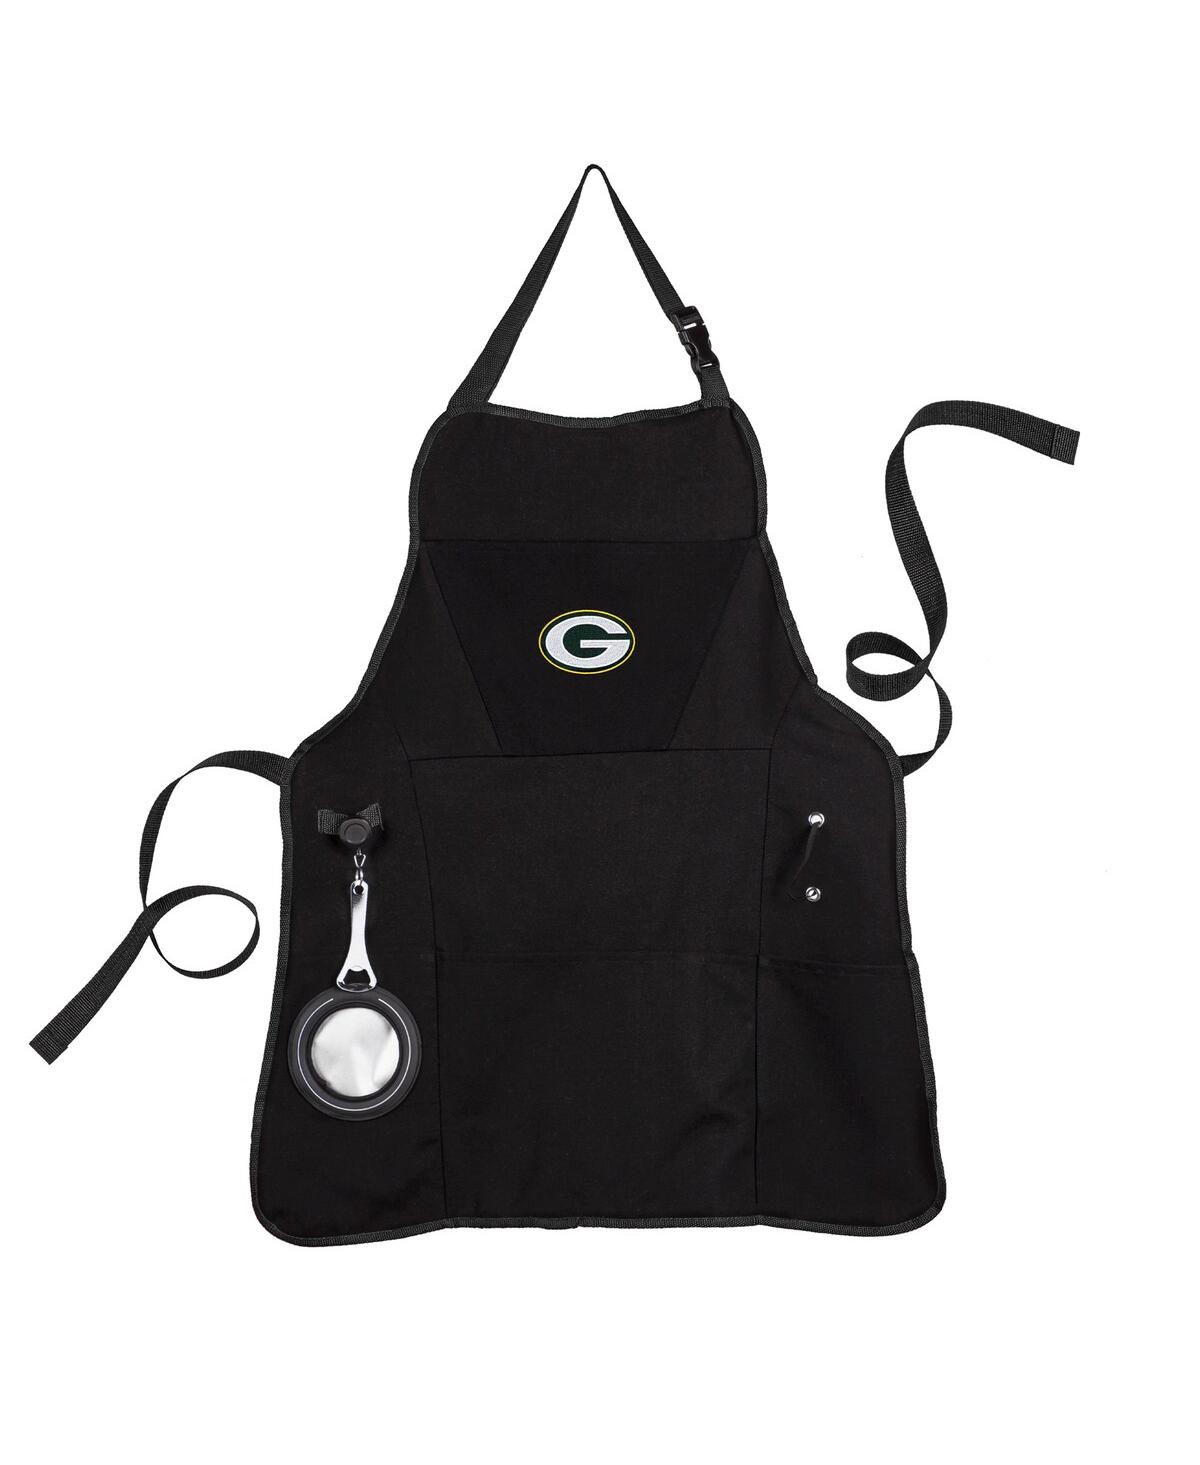 Green Bay Packers Grill Apron - Black